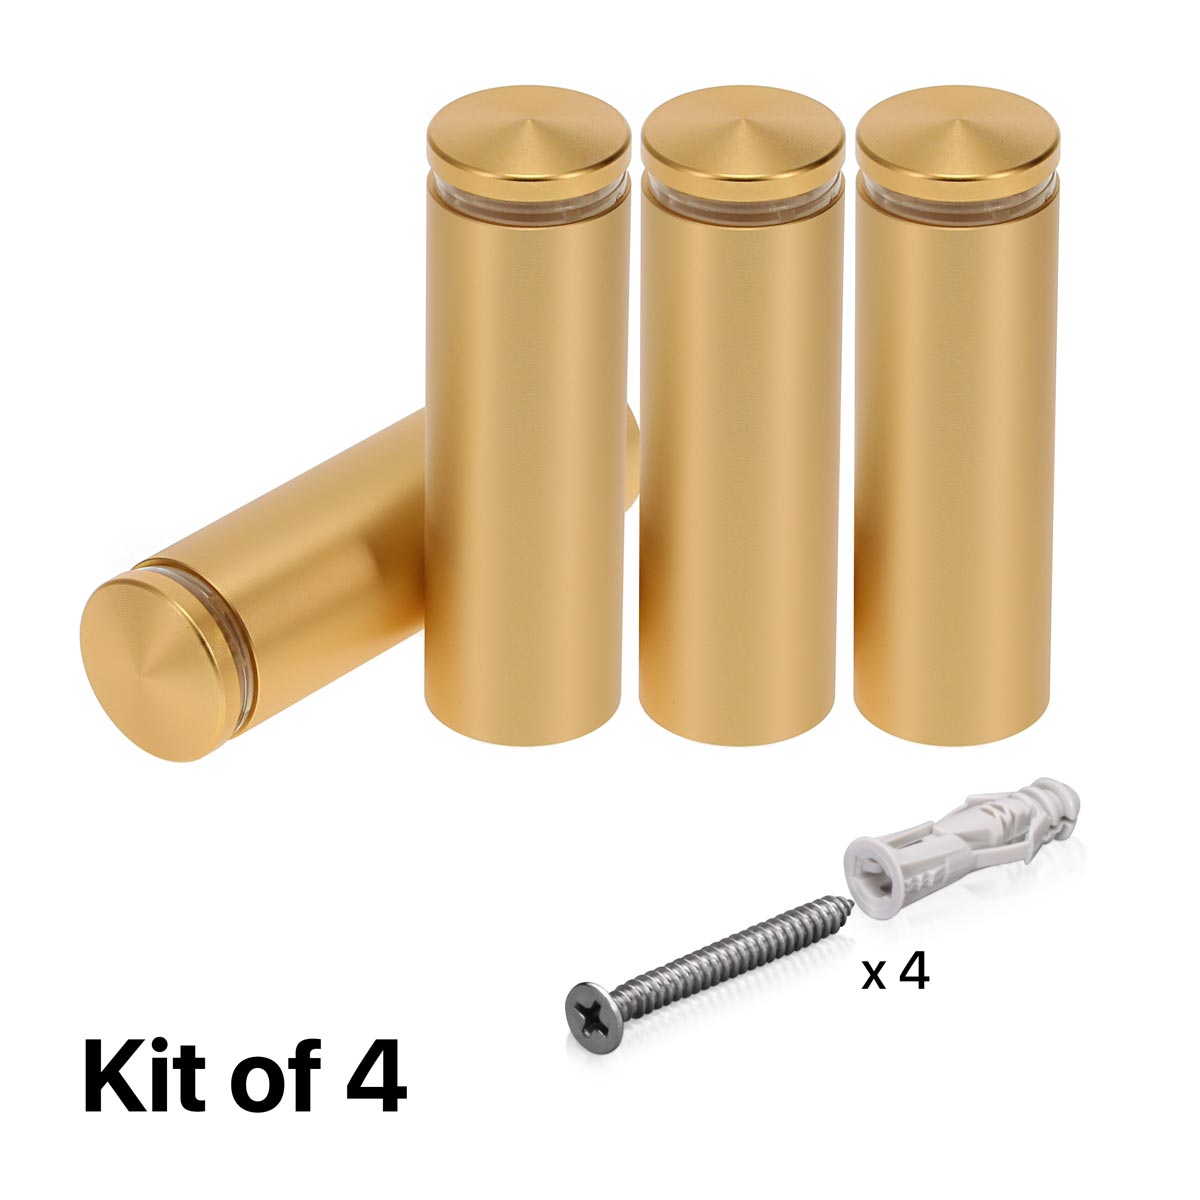 (Set of 4) 7/8'' Diameter X 2-1/2'' Barrel Length, Alumi. Rounded Head Standoffs, Matte Champagne Anodized Finish Standoff with (4) 2216Z Screws and (4) LANC1 Anchors for concrete or drywall (For In / Out use) [Required Material Hole Size: 7/16'']